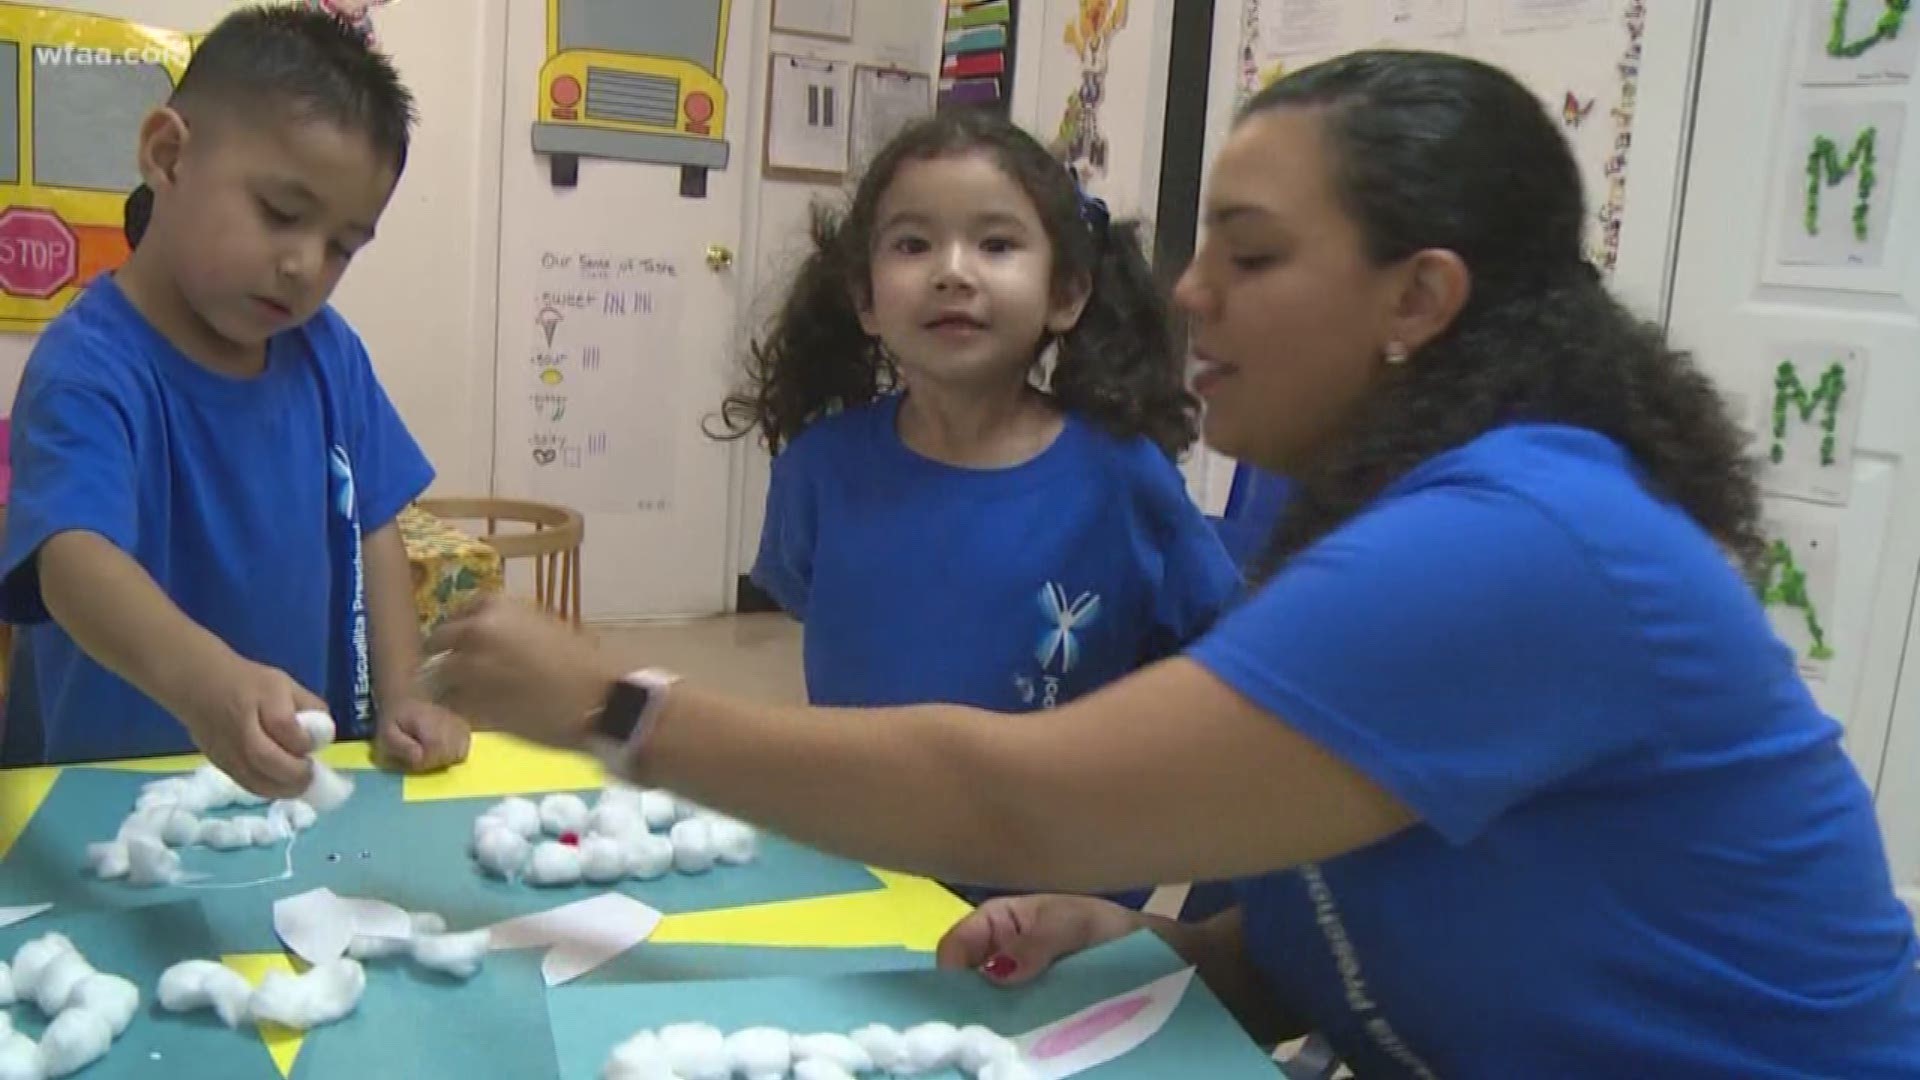 Mi Escuelita has been educating Dallas children for more than 40 years. The nonprofit mainly serves low income families whose primary language is not English.